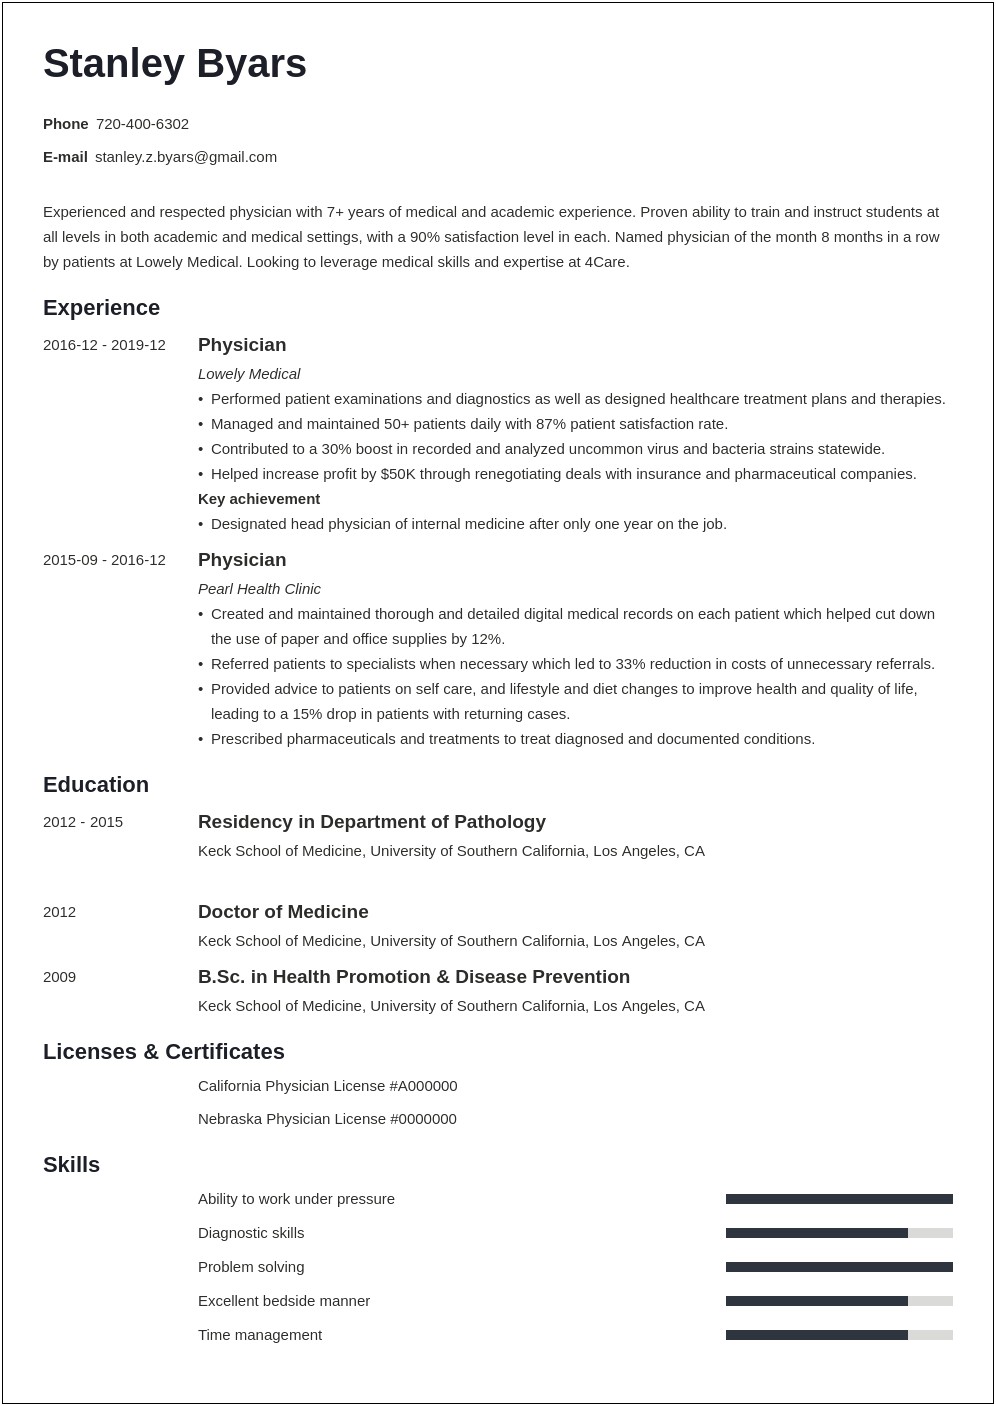 Sample Resume For Physician For Non Clinical Position